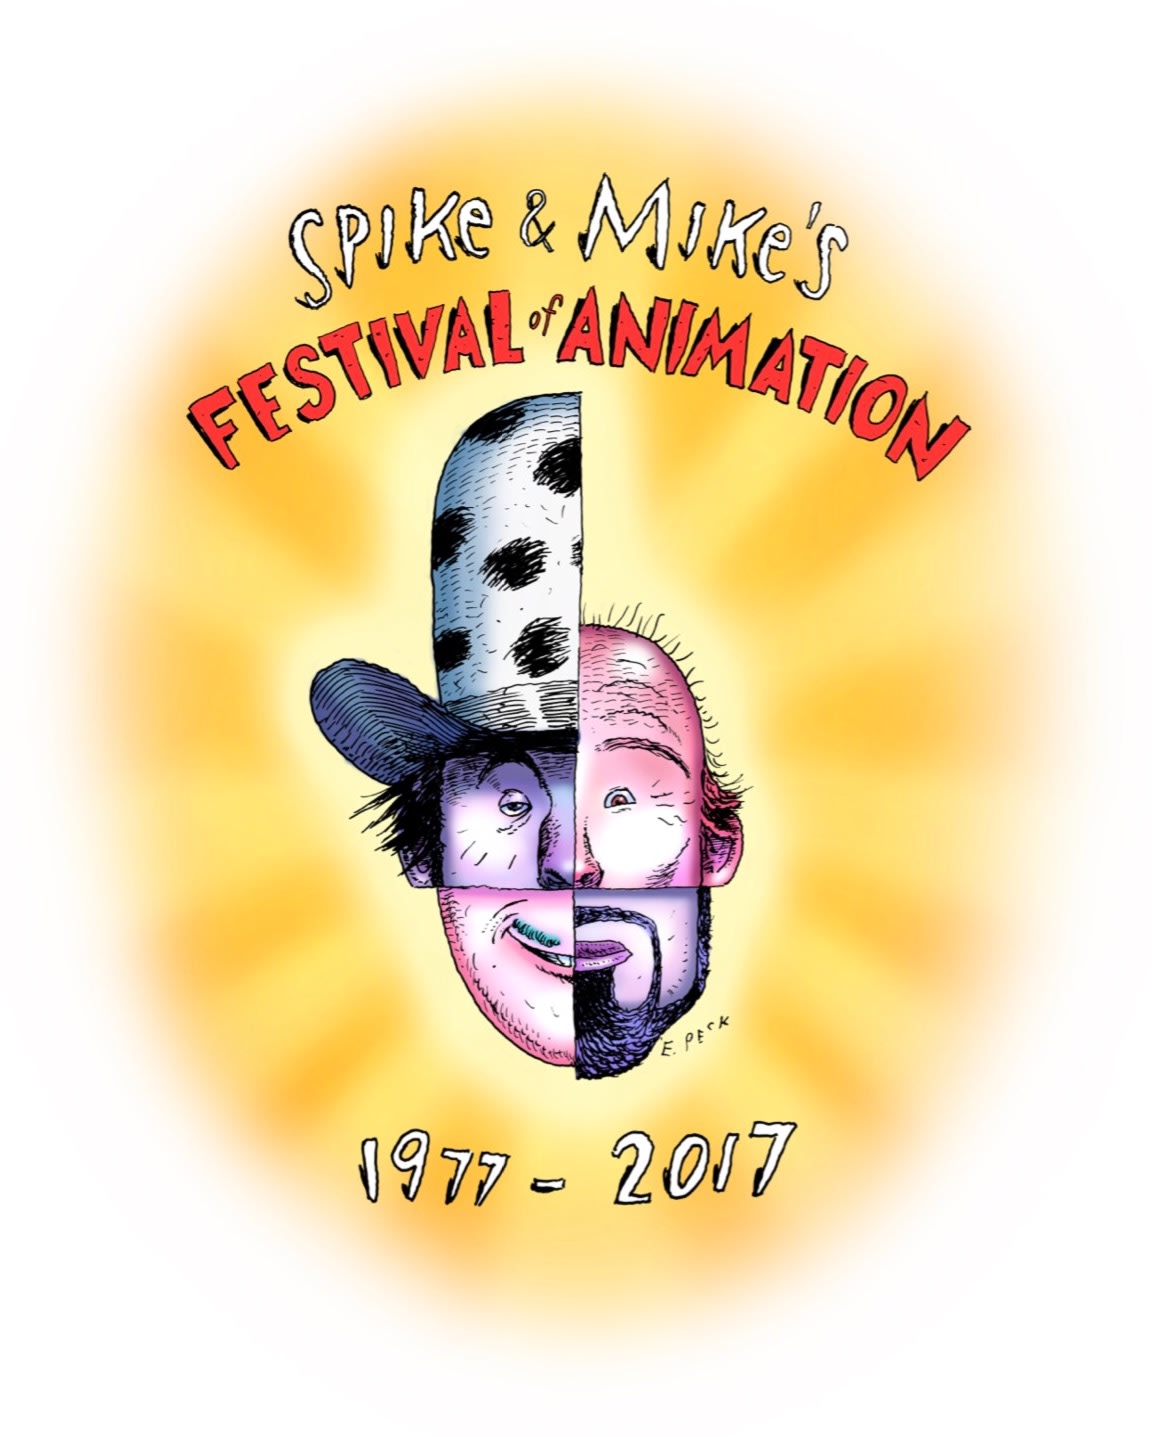 Spike & Mike's Classic Festival of Animation